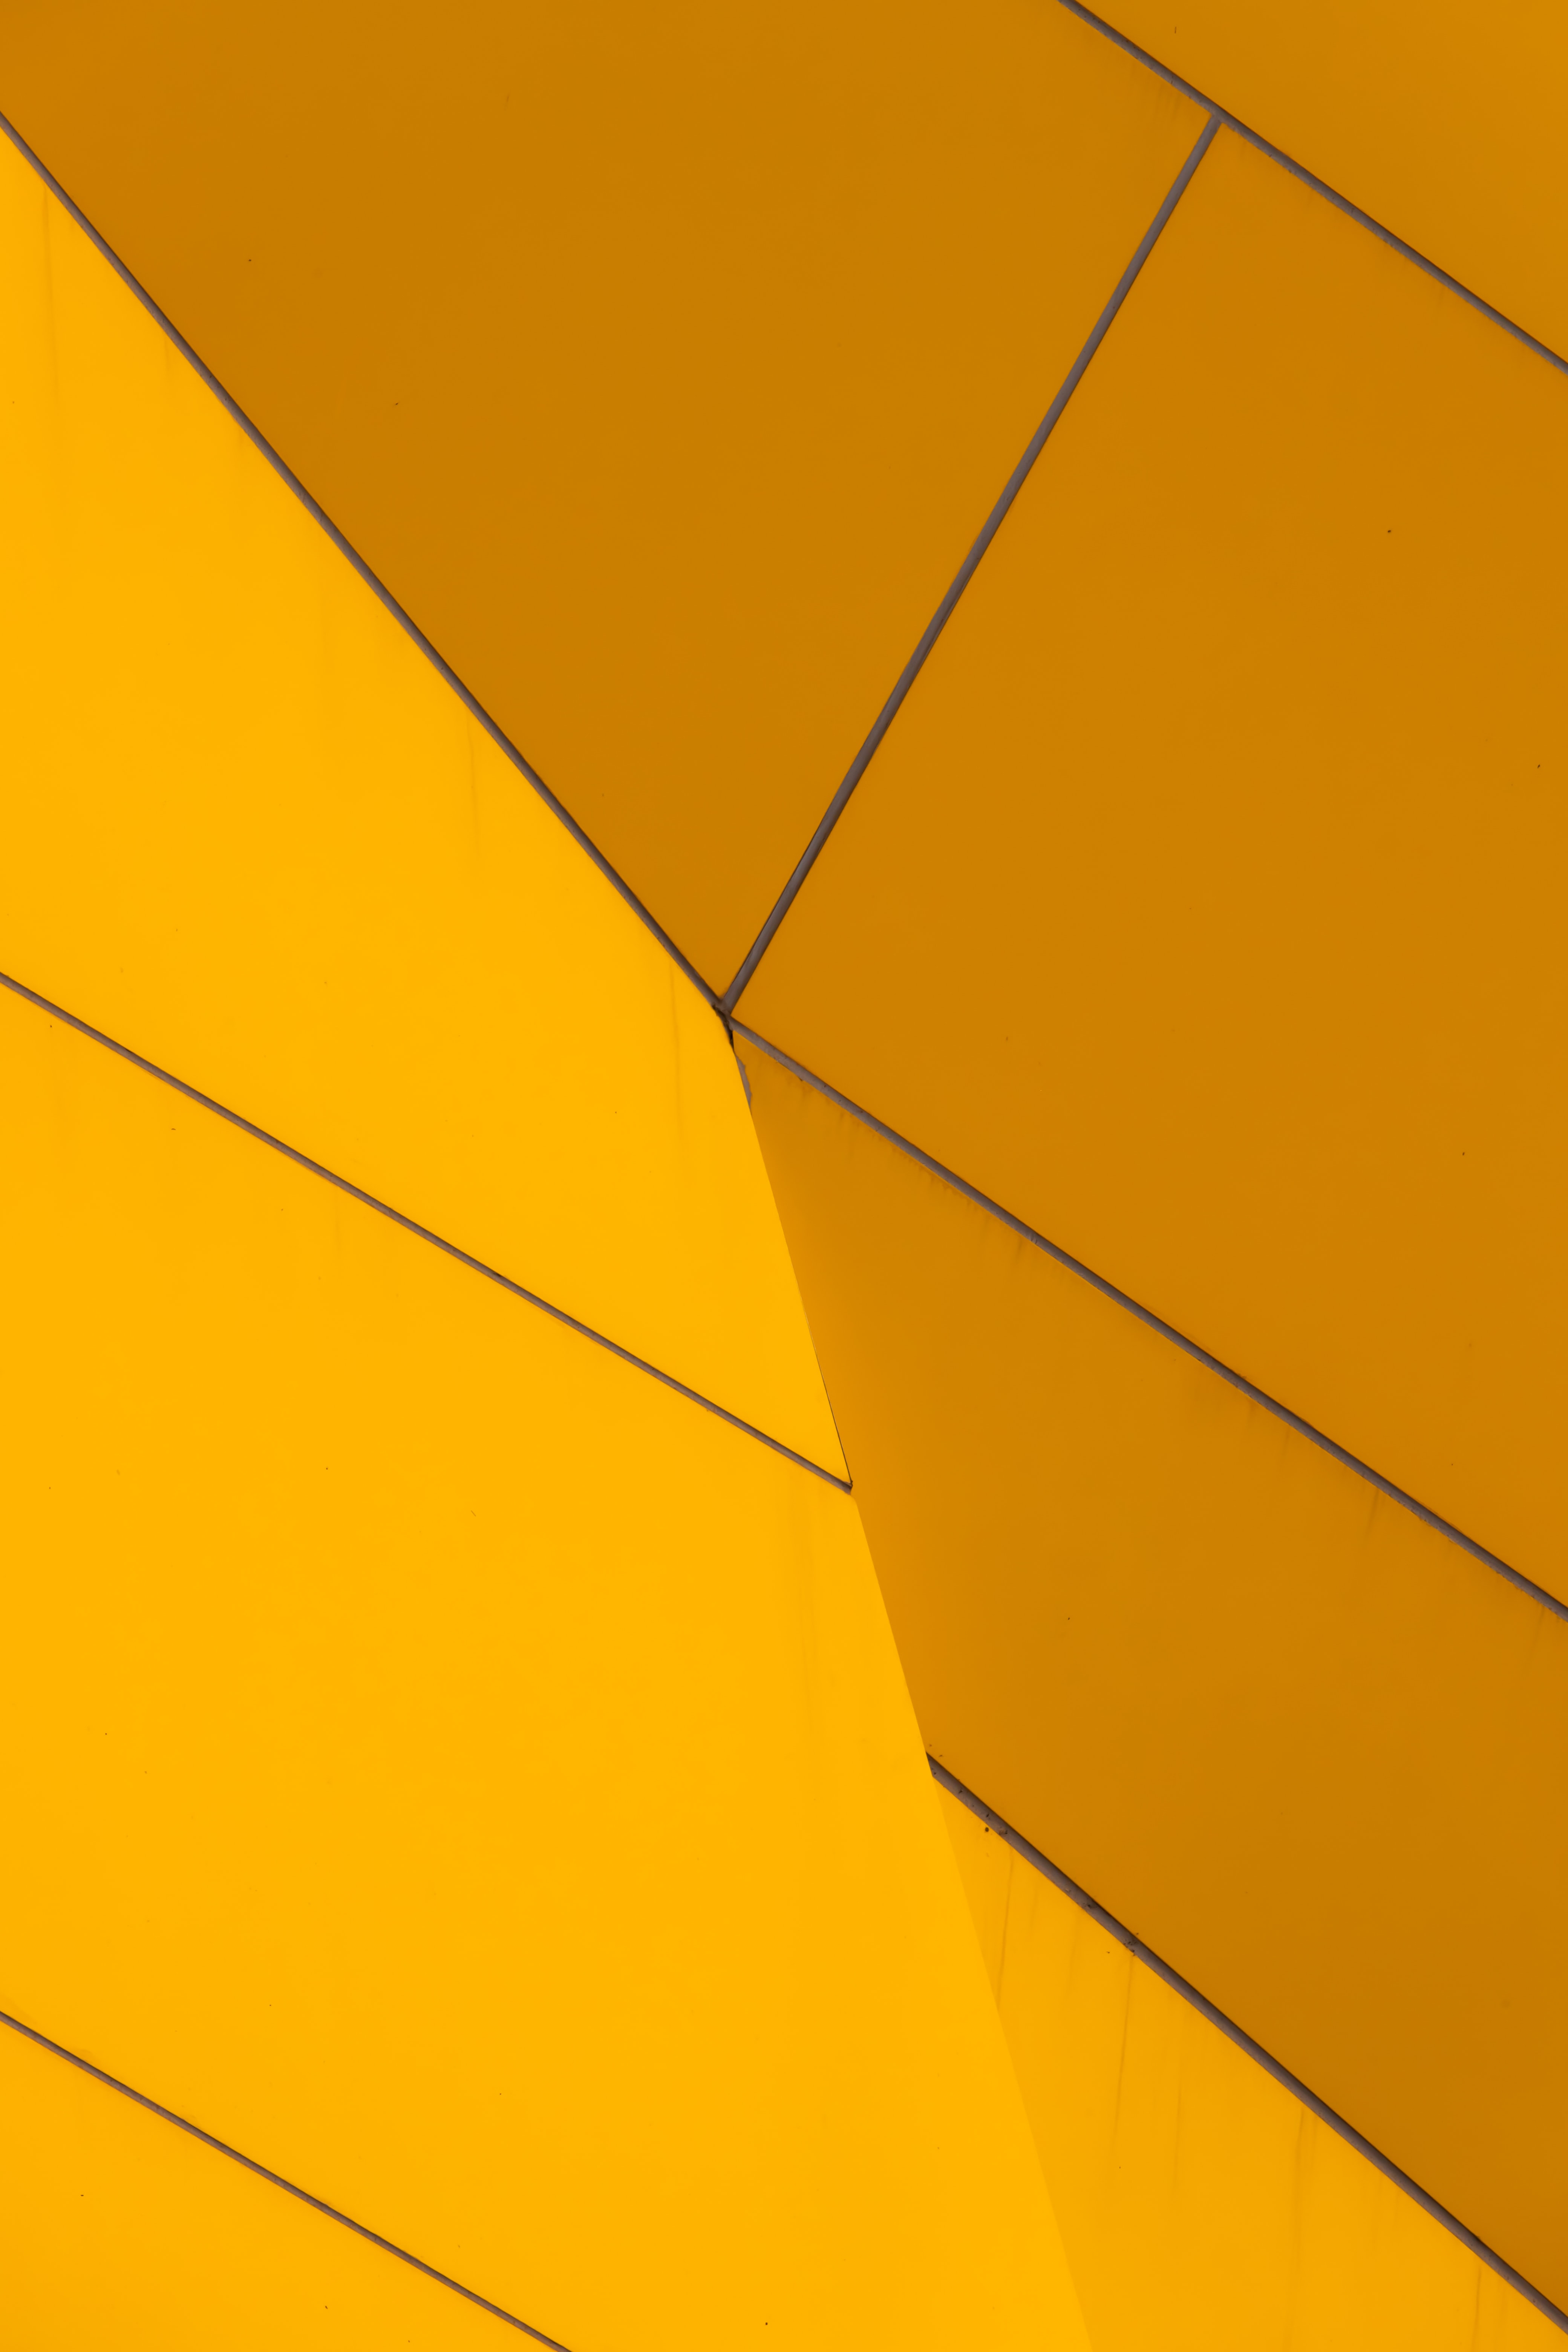 textures, yellow, texture, surface, volume, fragments 1080p